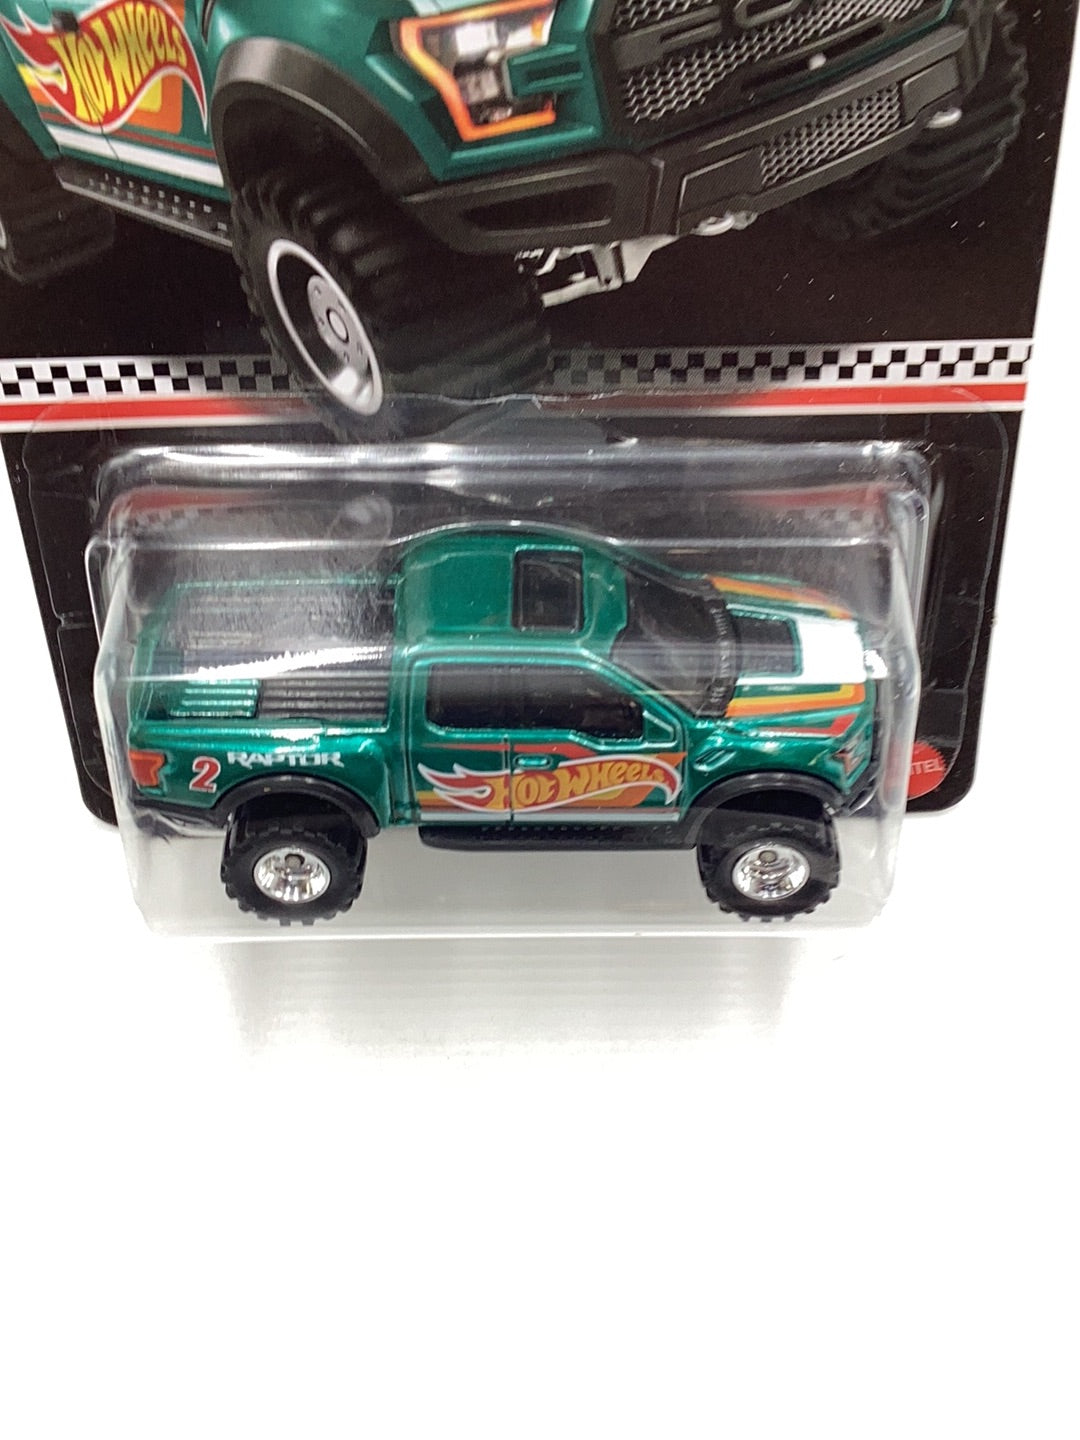 2021 collectors edition Hot wheels RLC Mail in  17 Ford F150 Raptor with protector